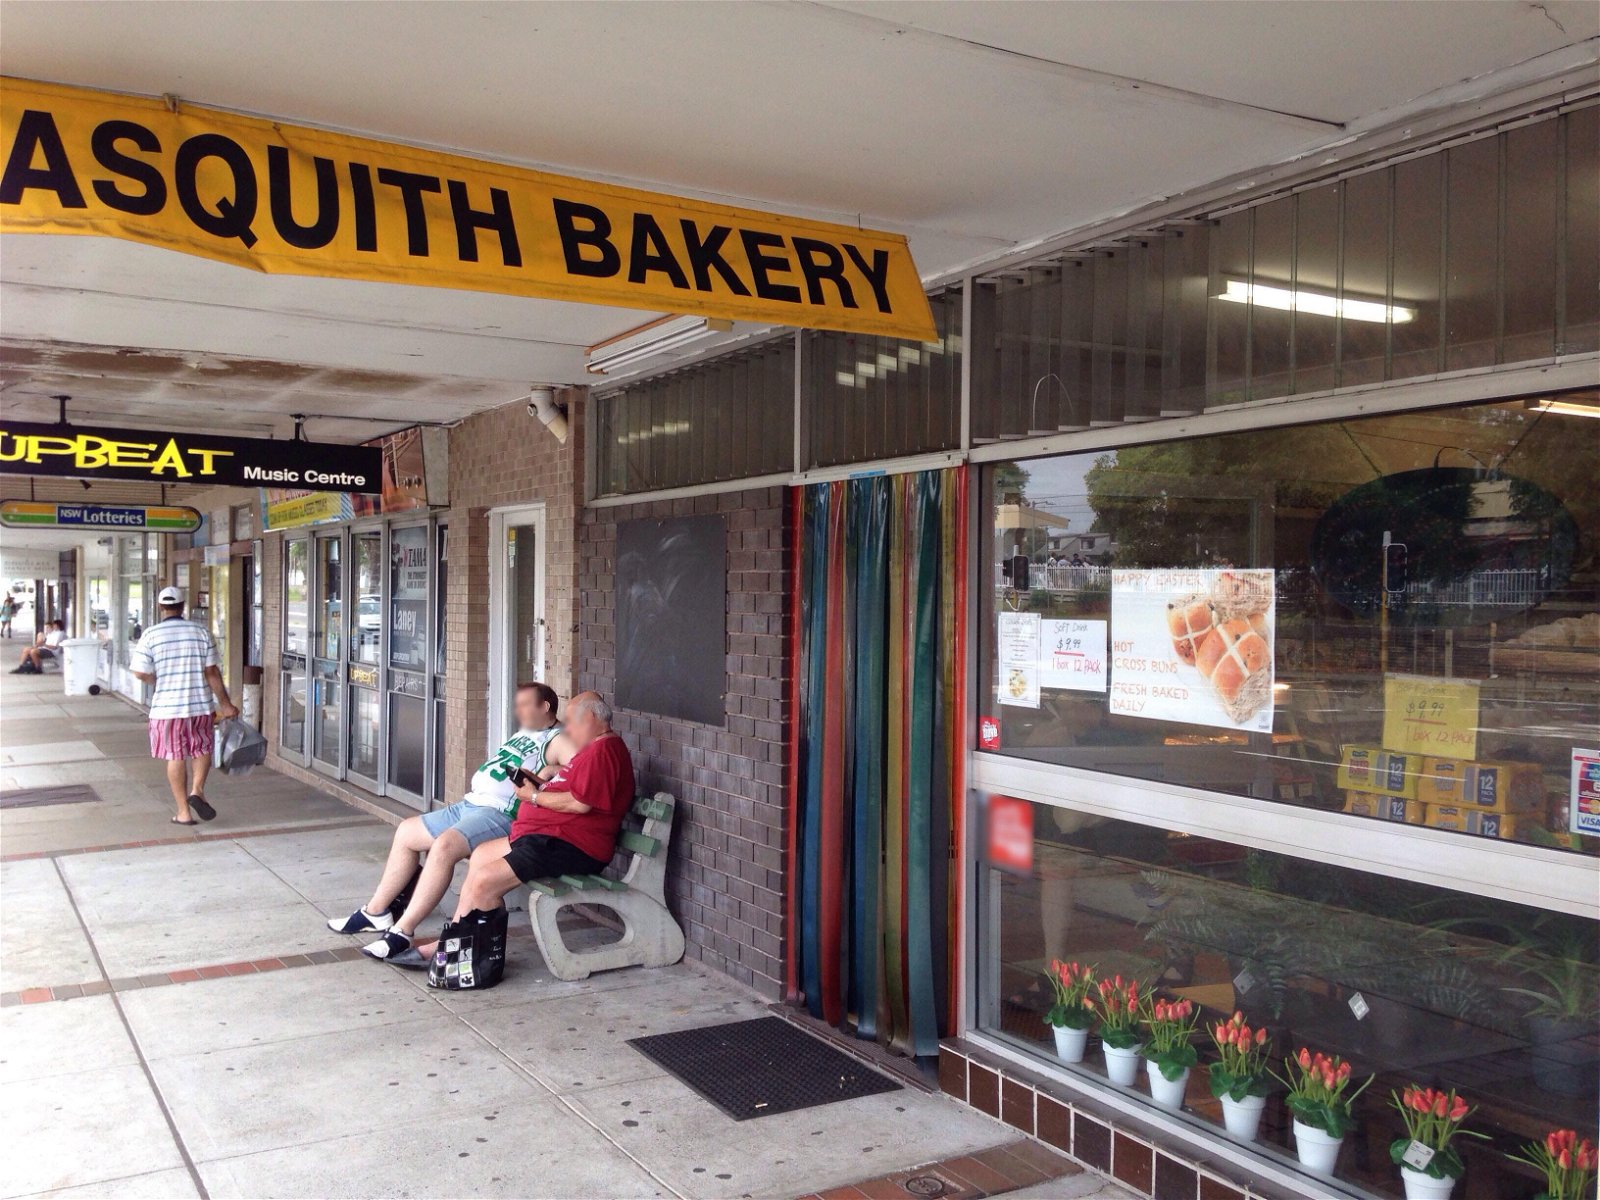 Asquith Bakery